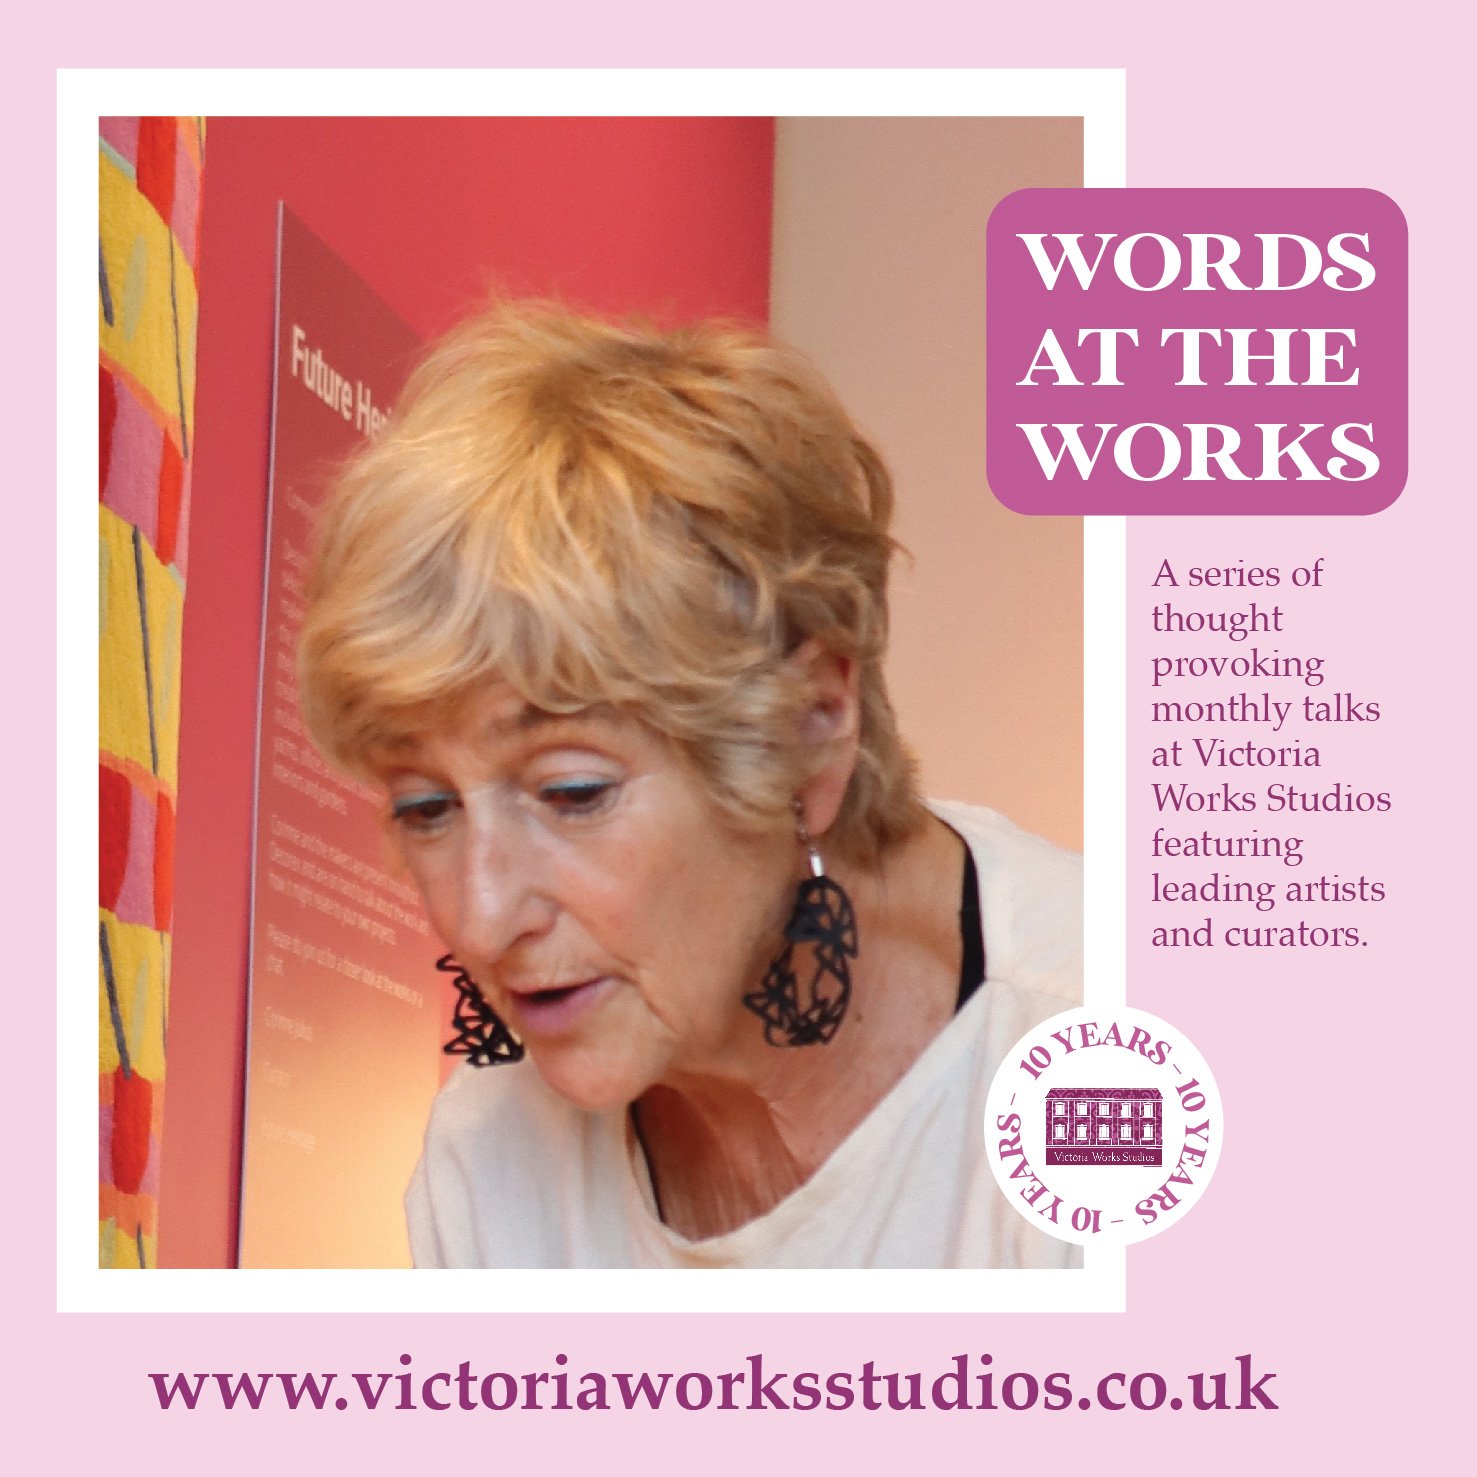 It's Monday morning so here's something inspiring to look forward to .... a talk about the joy of commissioning and collecting on Thursday 6th June from celebrated curator, critic and broadcaster Corinne Julius. Come and join us in the VWS event spac